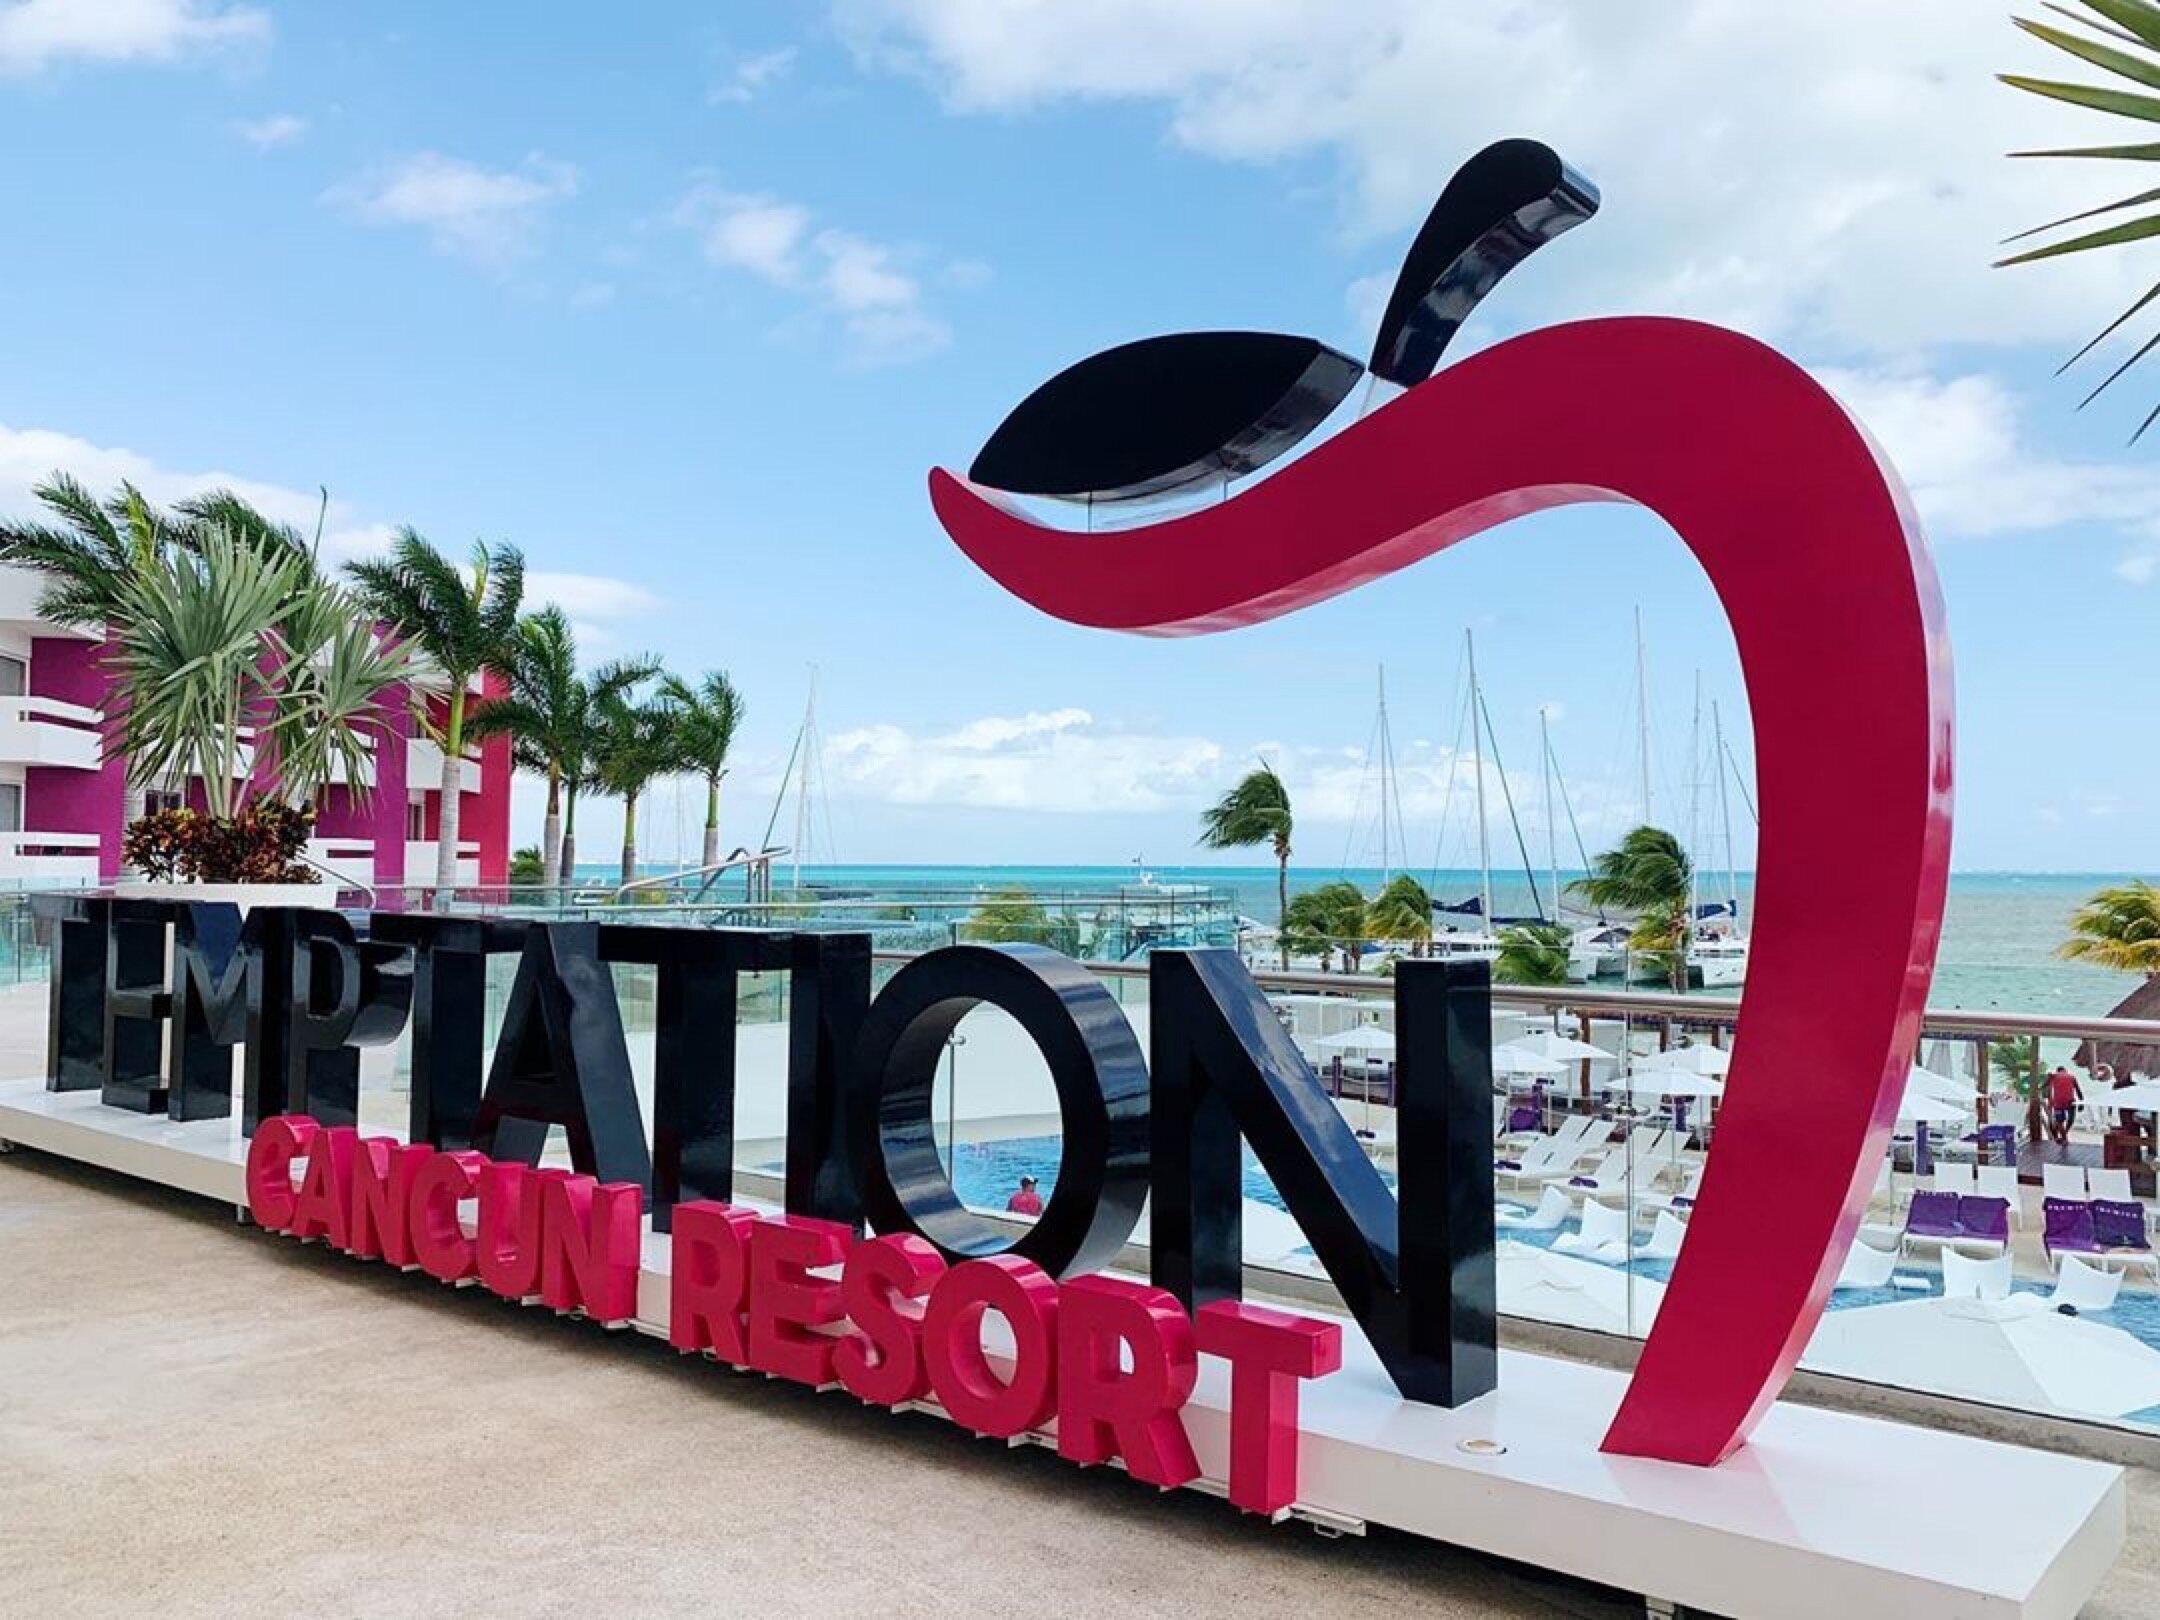 Temptation Cancun Resort Hotel Review — drillinjourneys pic